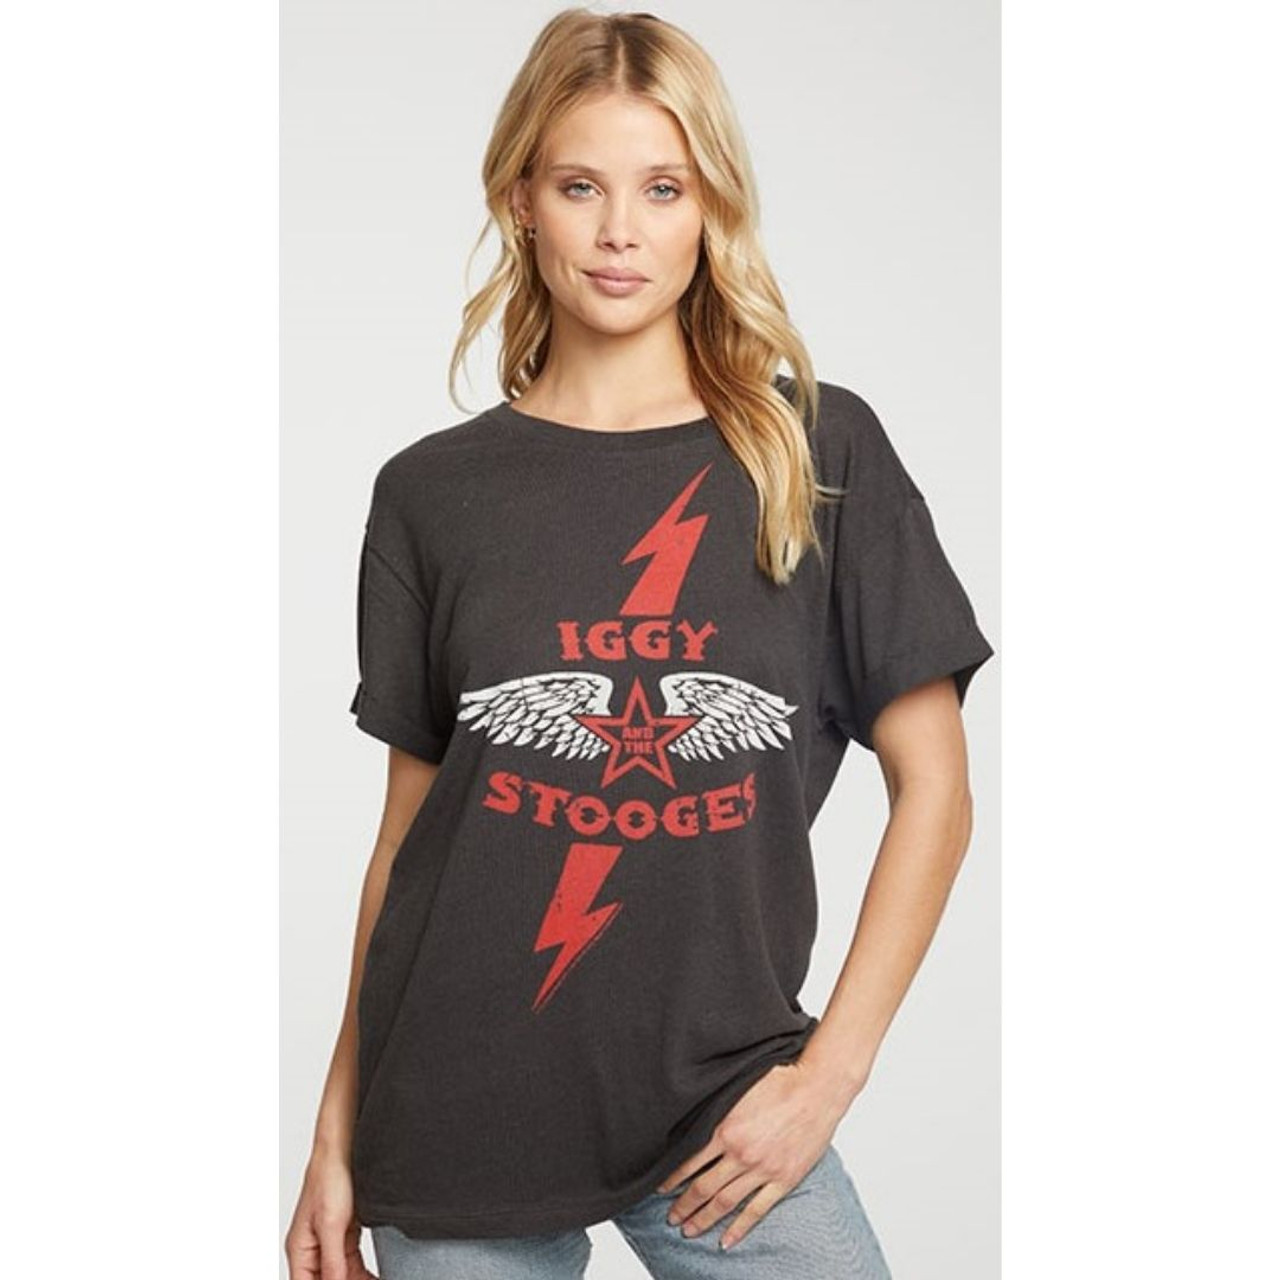 Iggy Pop Women's Fashion T-shirt by Chaser - Iggy Pop and the Stooges Logo.  Black Vintage Shirt